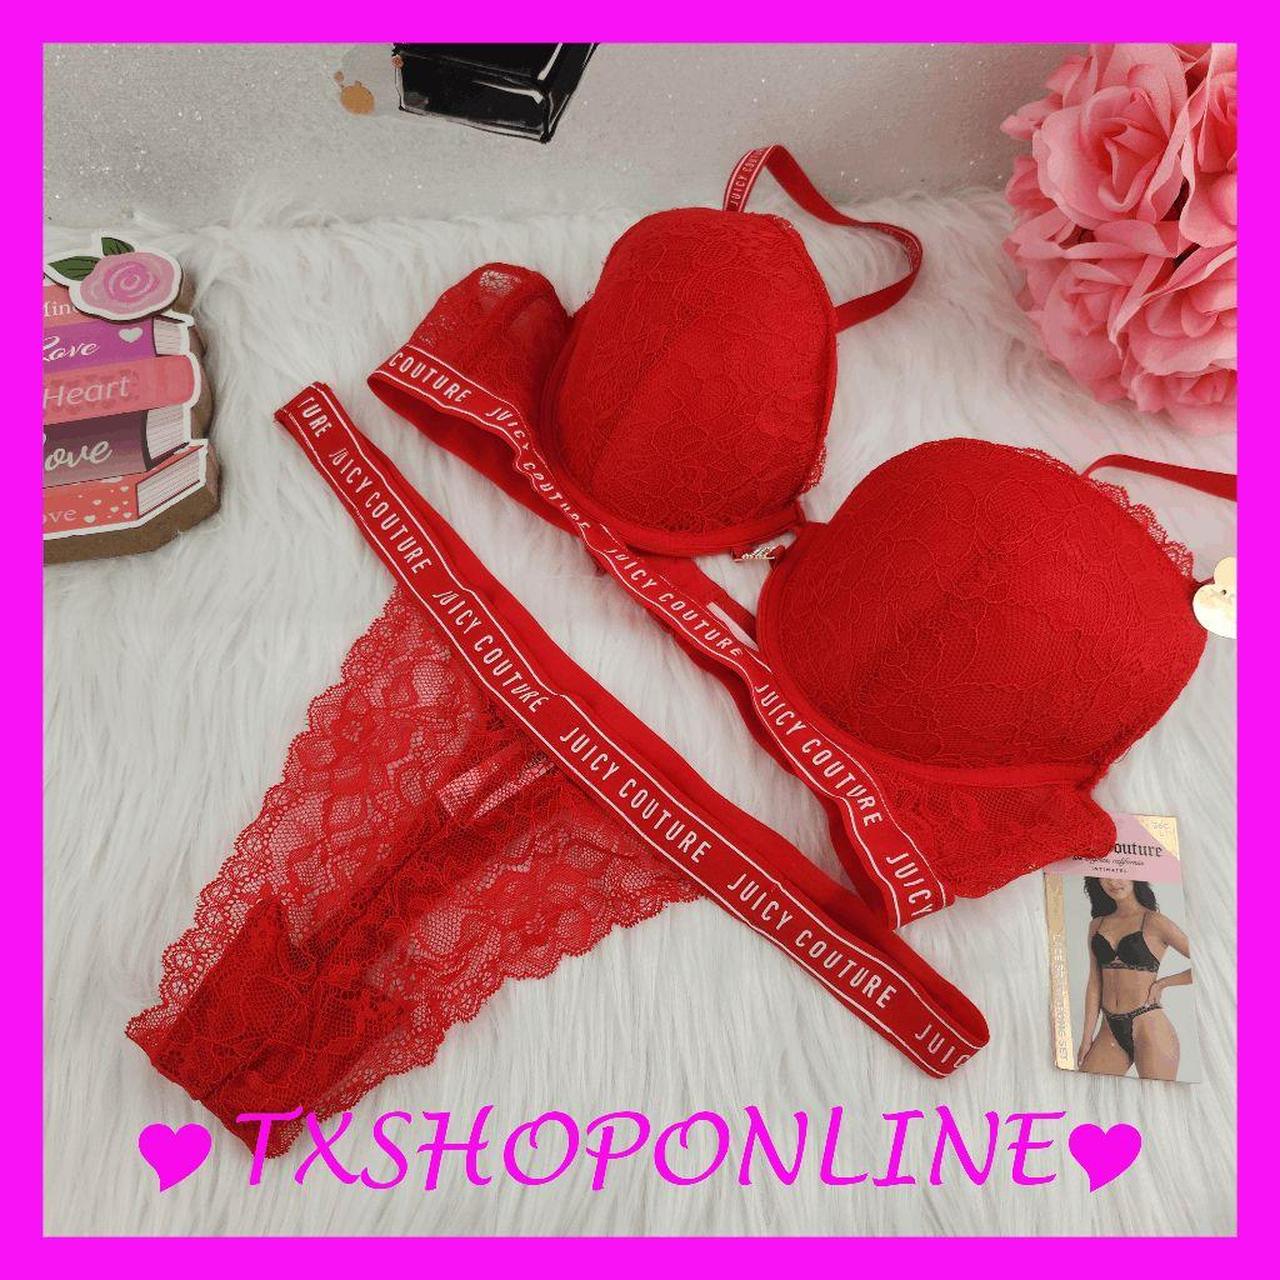 Juicy Couture Bras and Bra Sets for sale